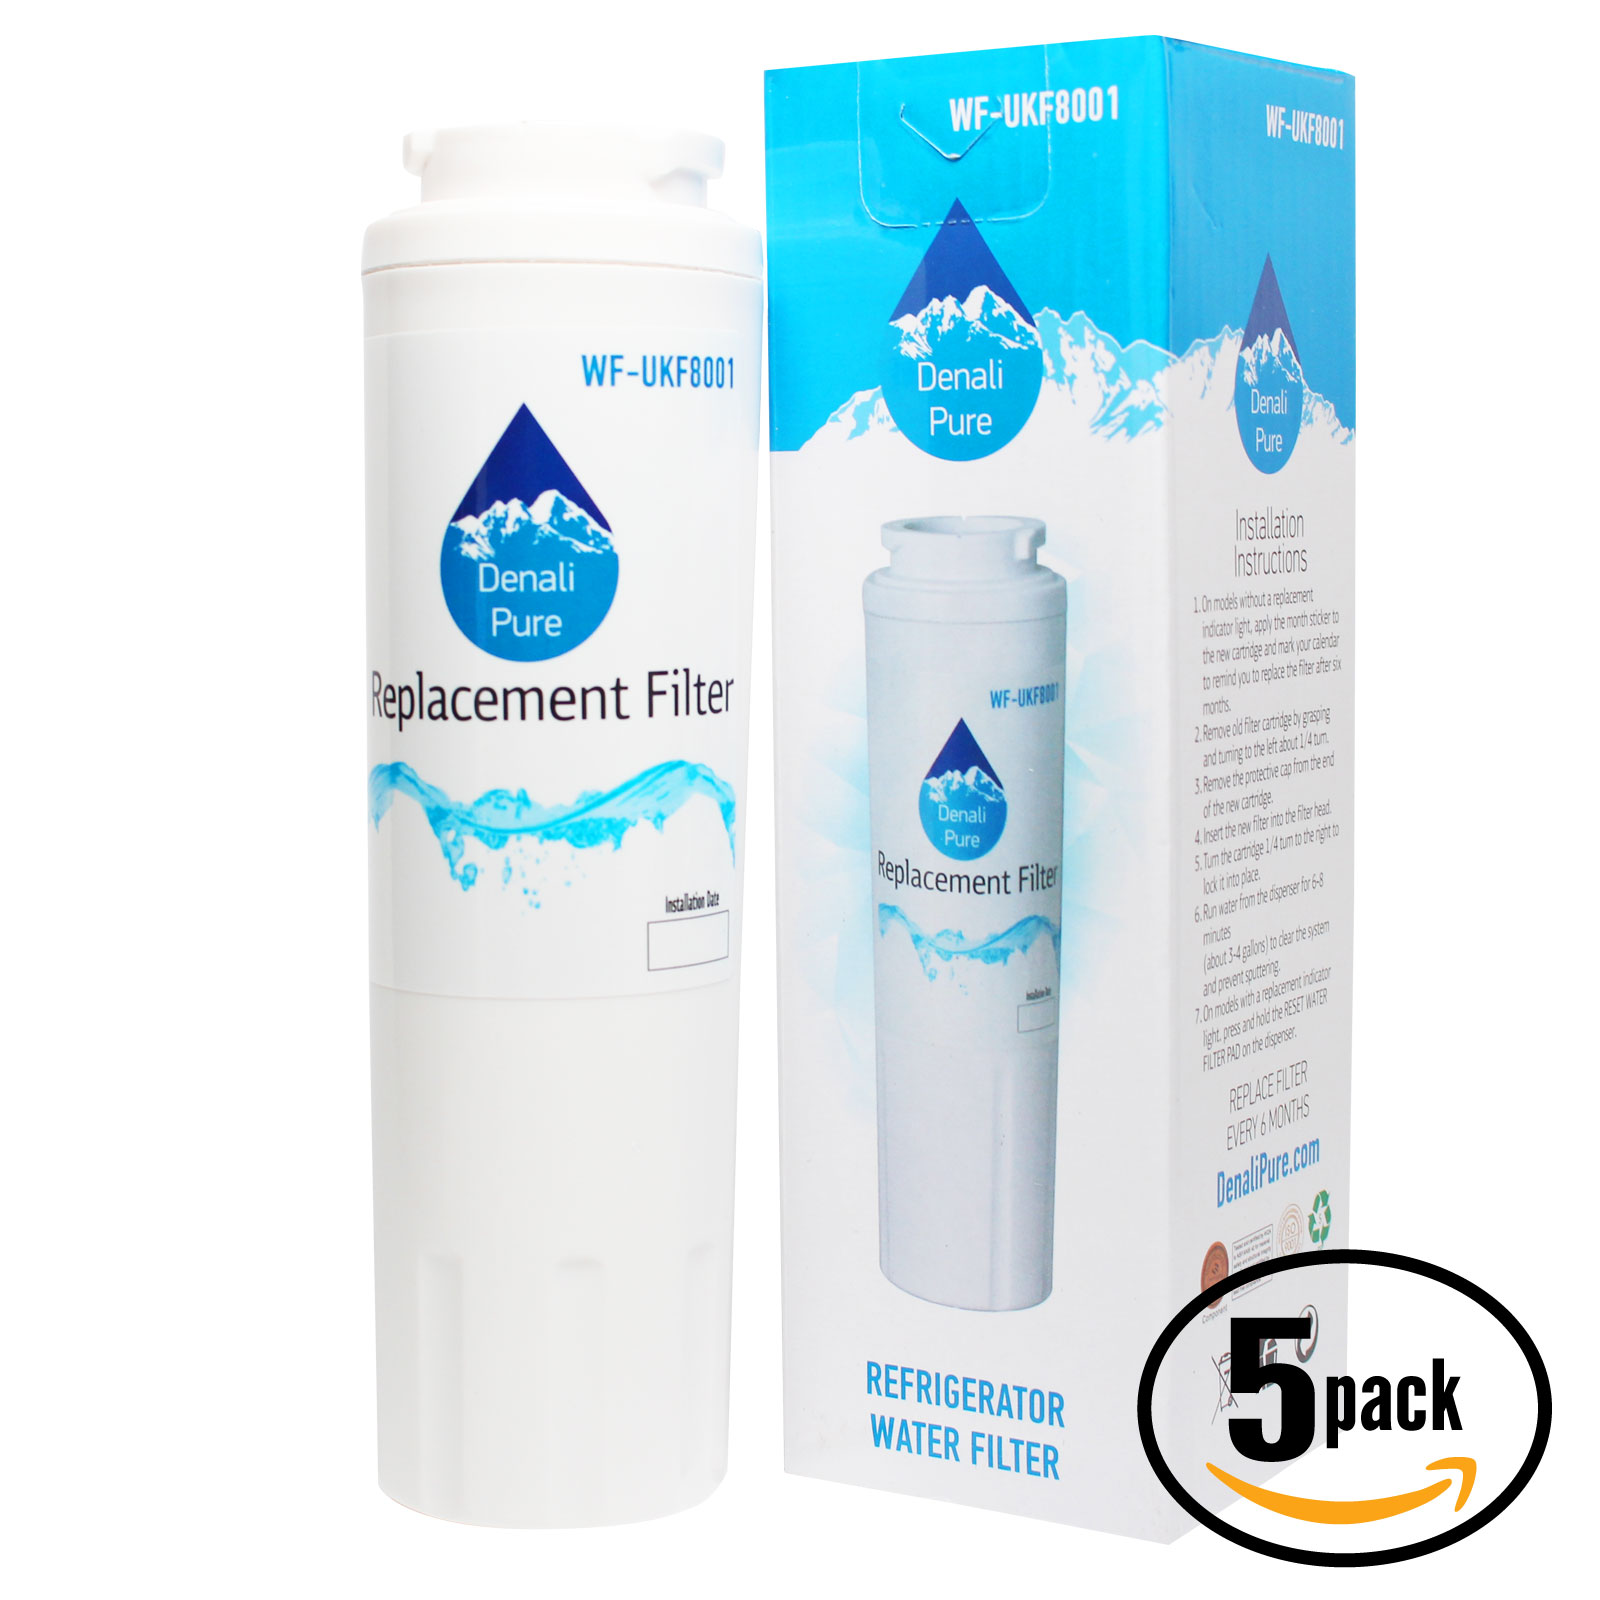 5-Pack Replacement for Whirlpool GX5FHTXVB Refrigerator Water Filter - Compatible with Whirlpool 4396395 Fridge Water Filter Cartridge - Denali Pure Brand - image 1 of 4